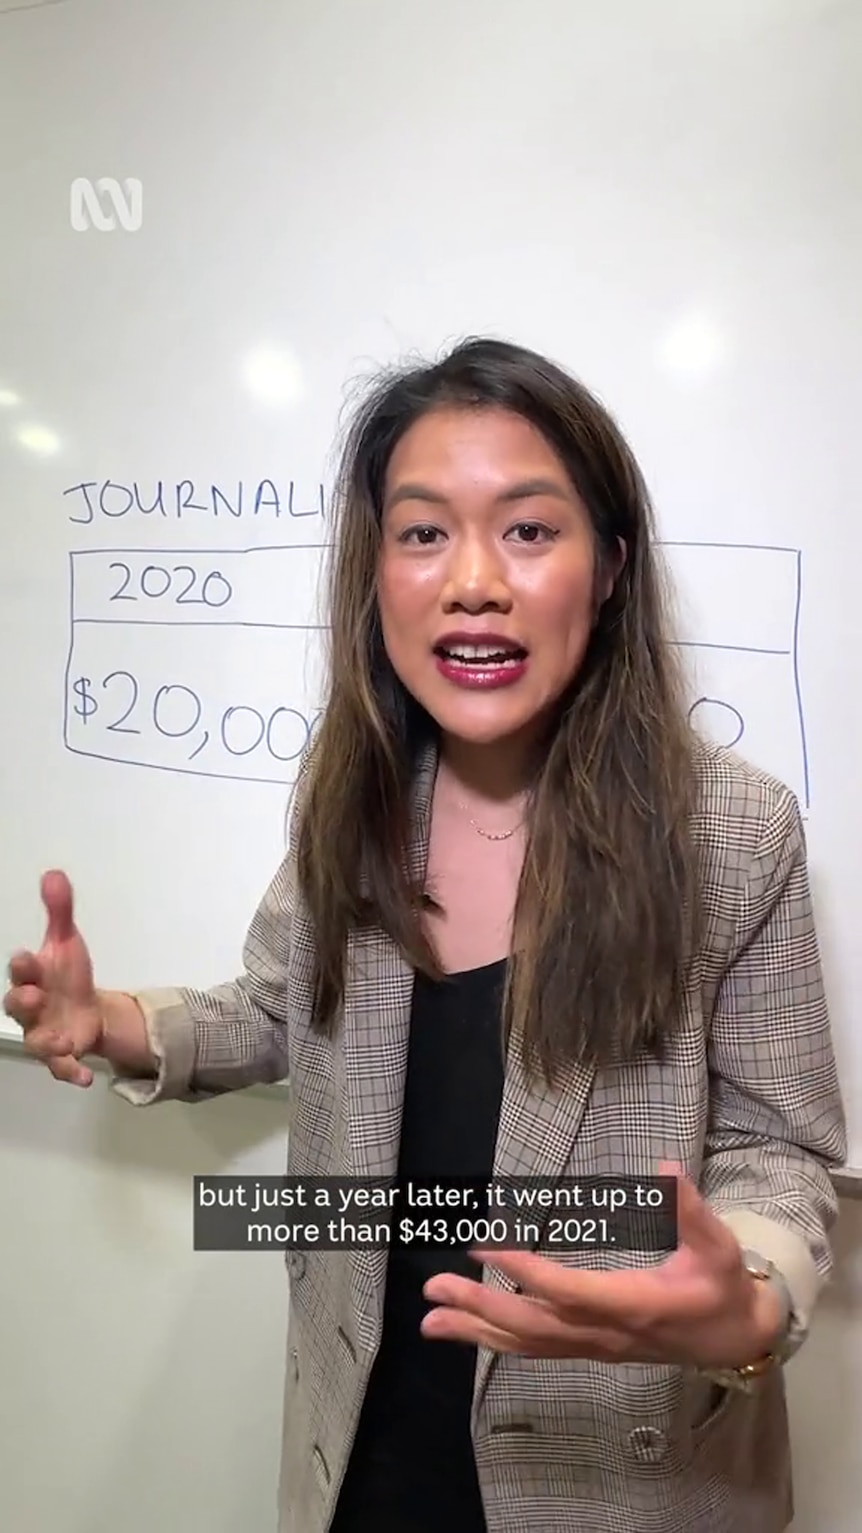 A young Asian woman gestures with her open hands standing in front of a whiteboard